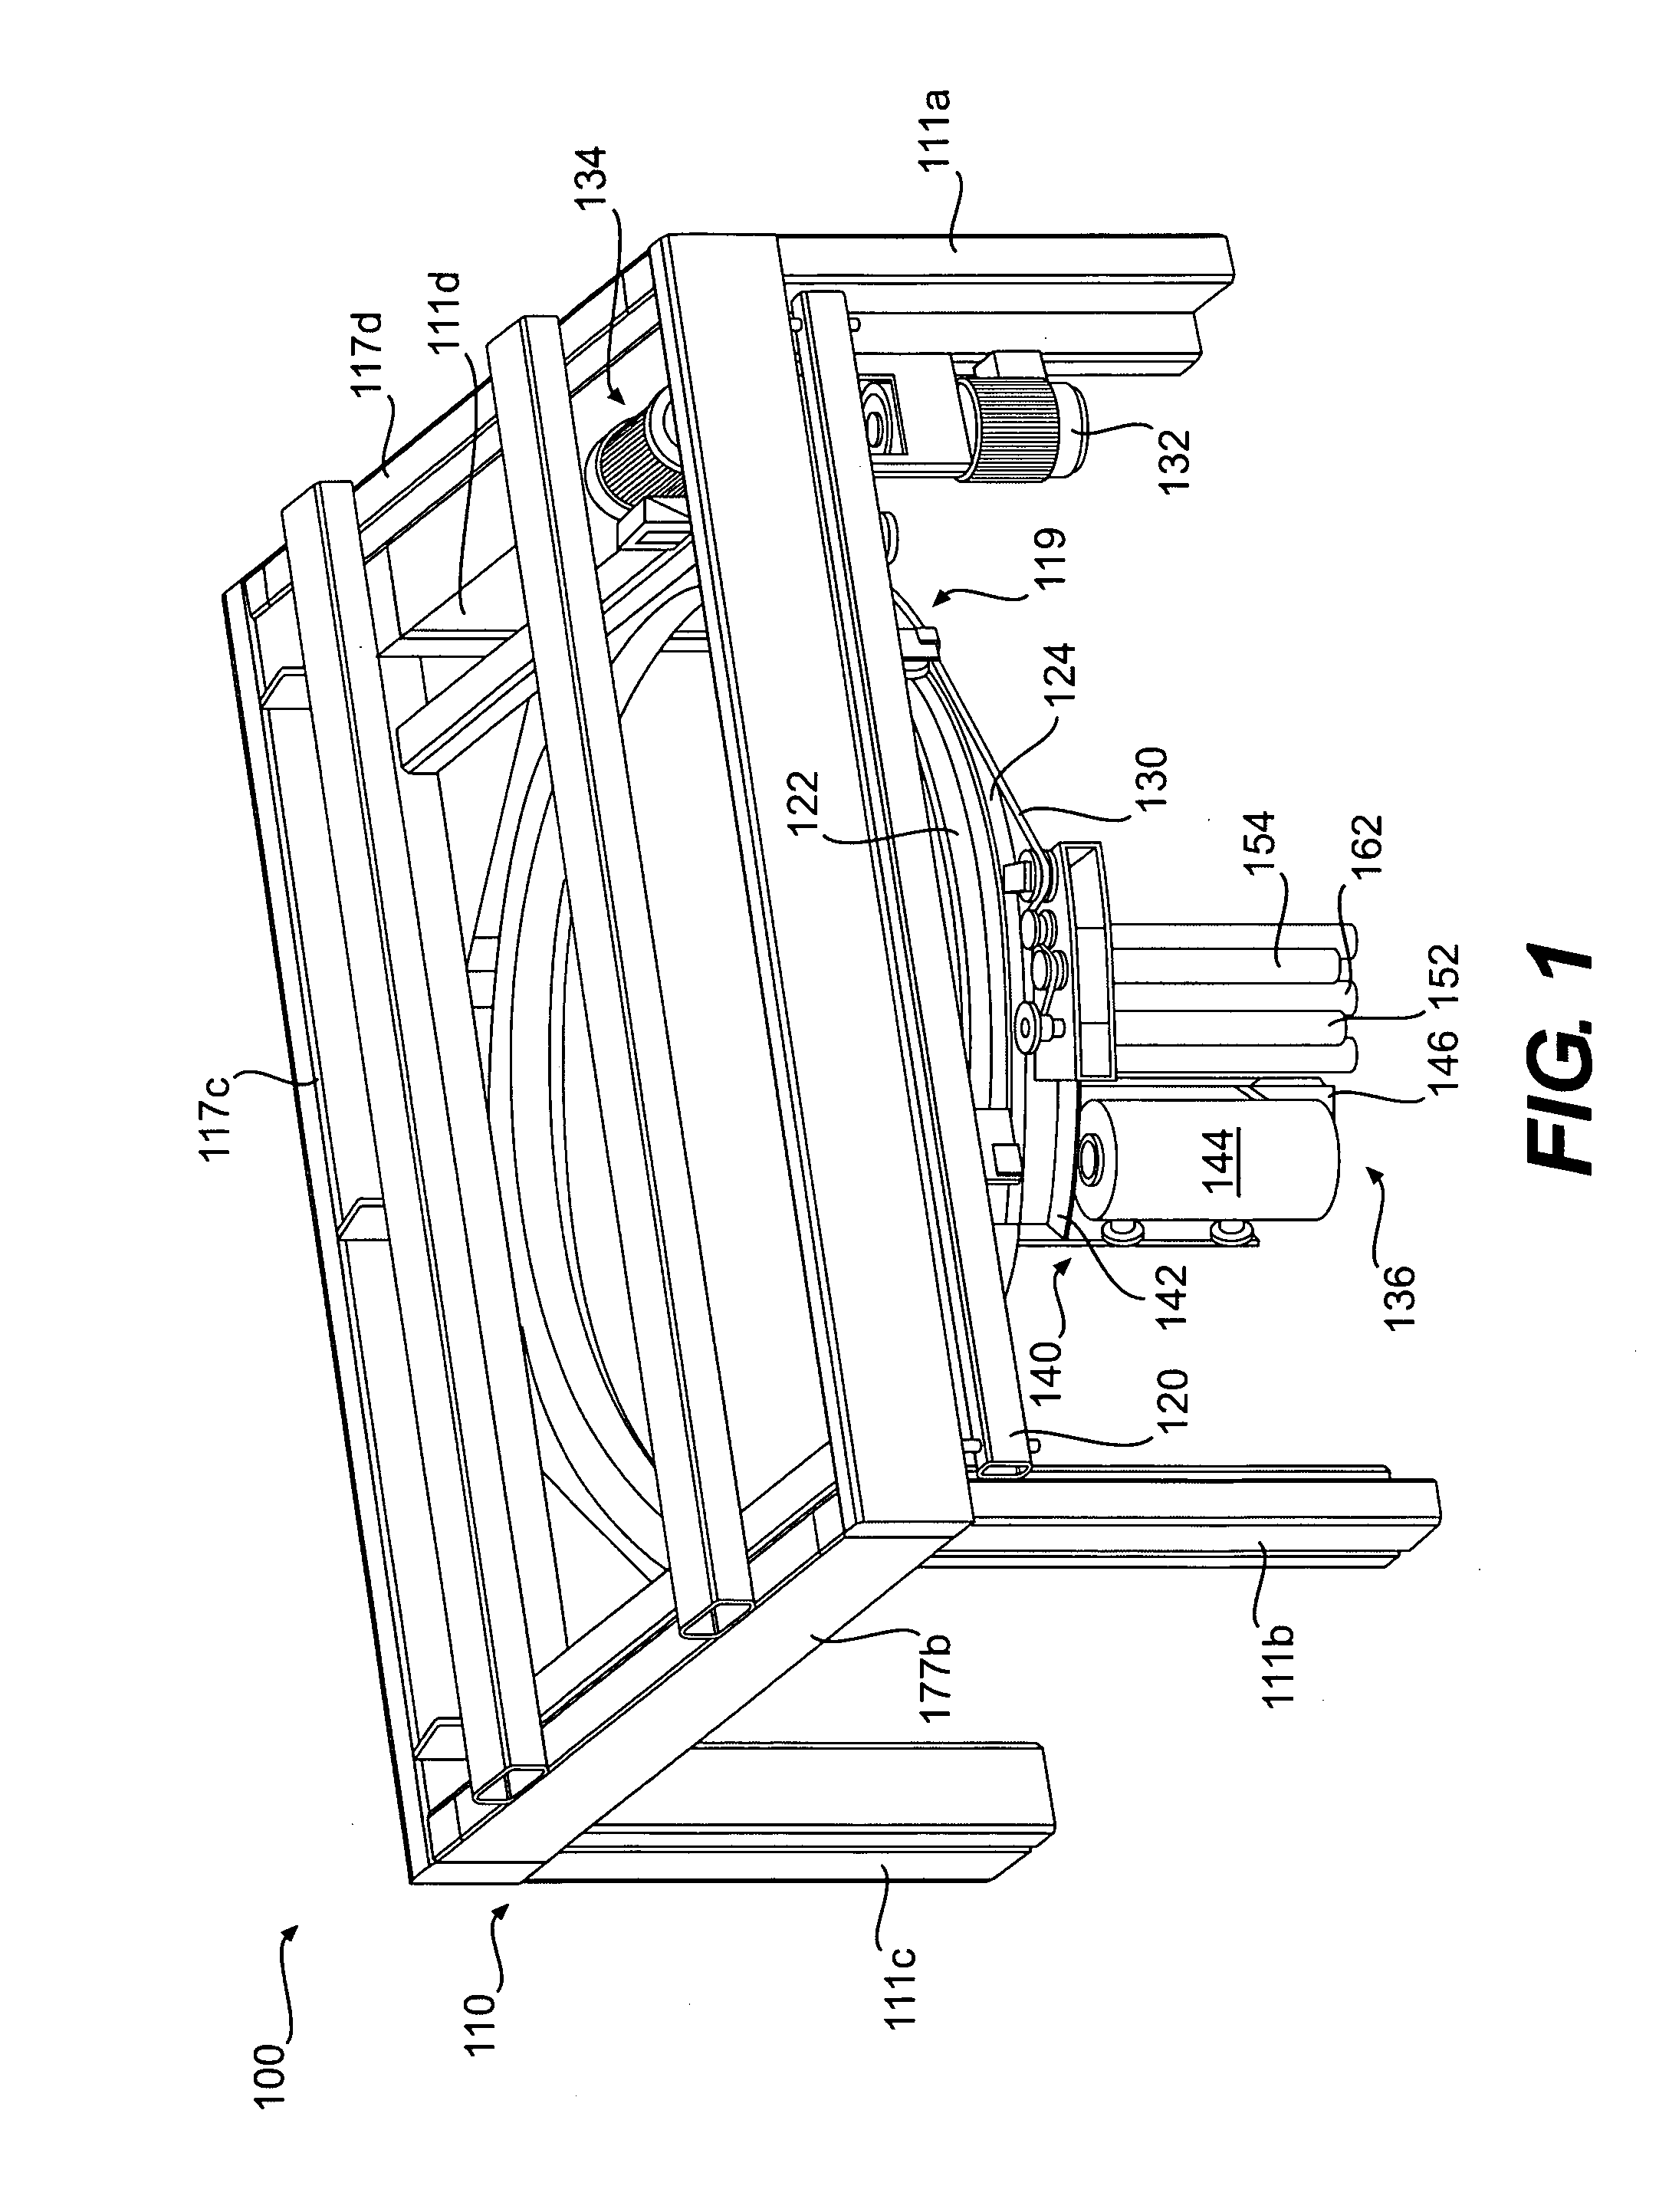 Method and apparatus for dispensing a predetermined fixed amount of pre-stretched film relative to load girth